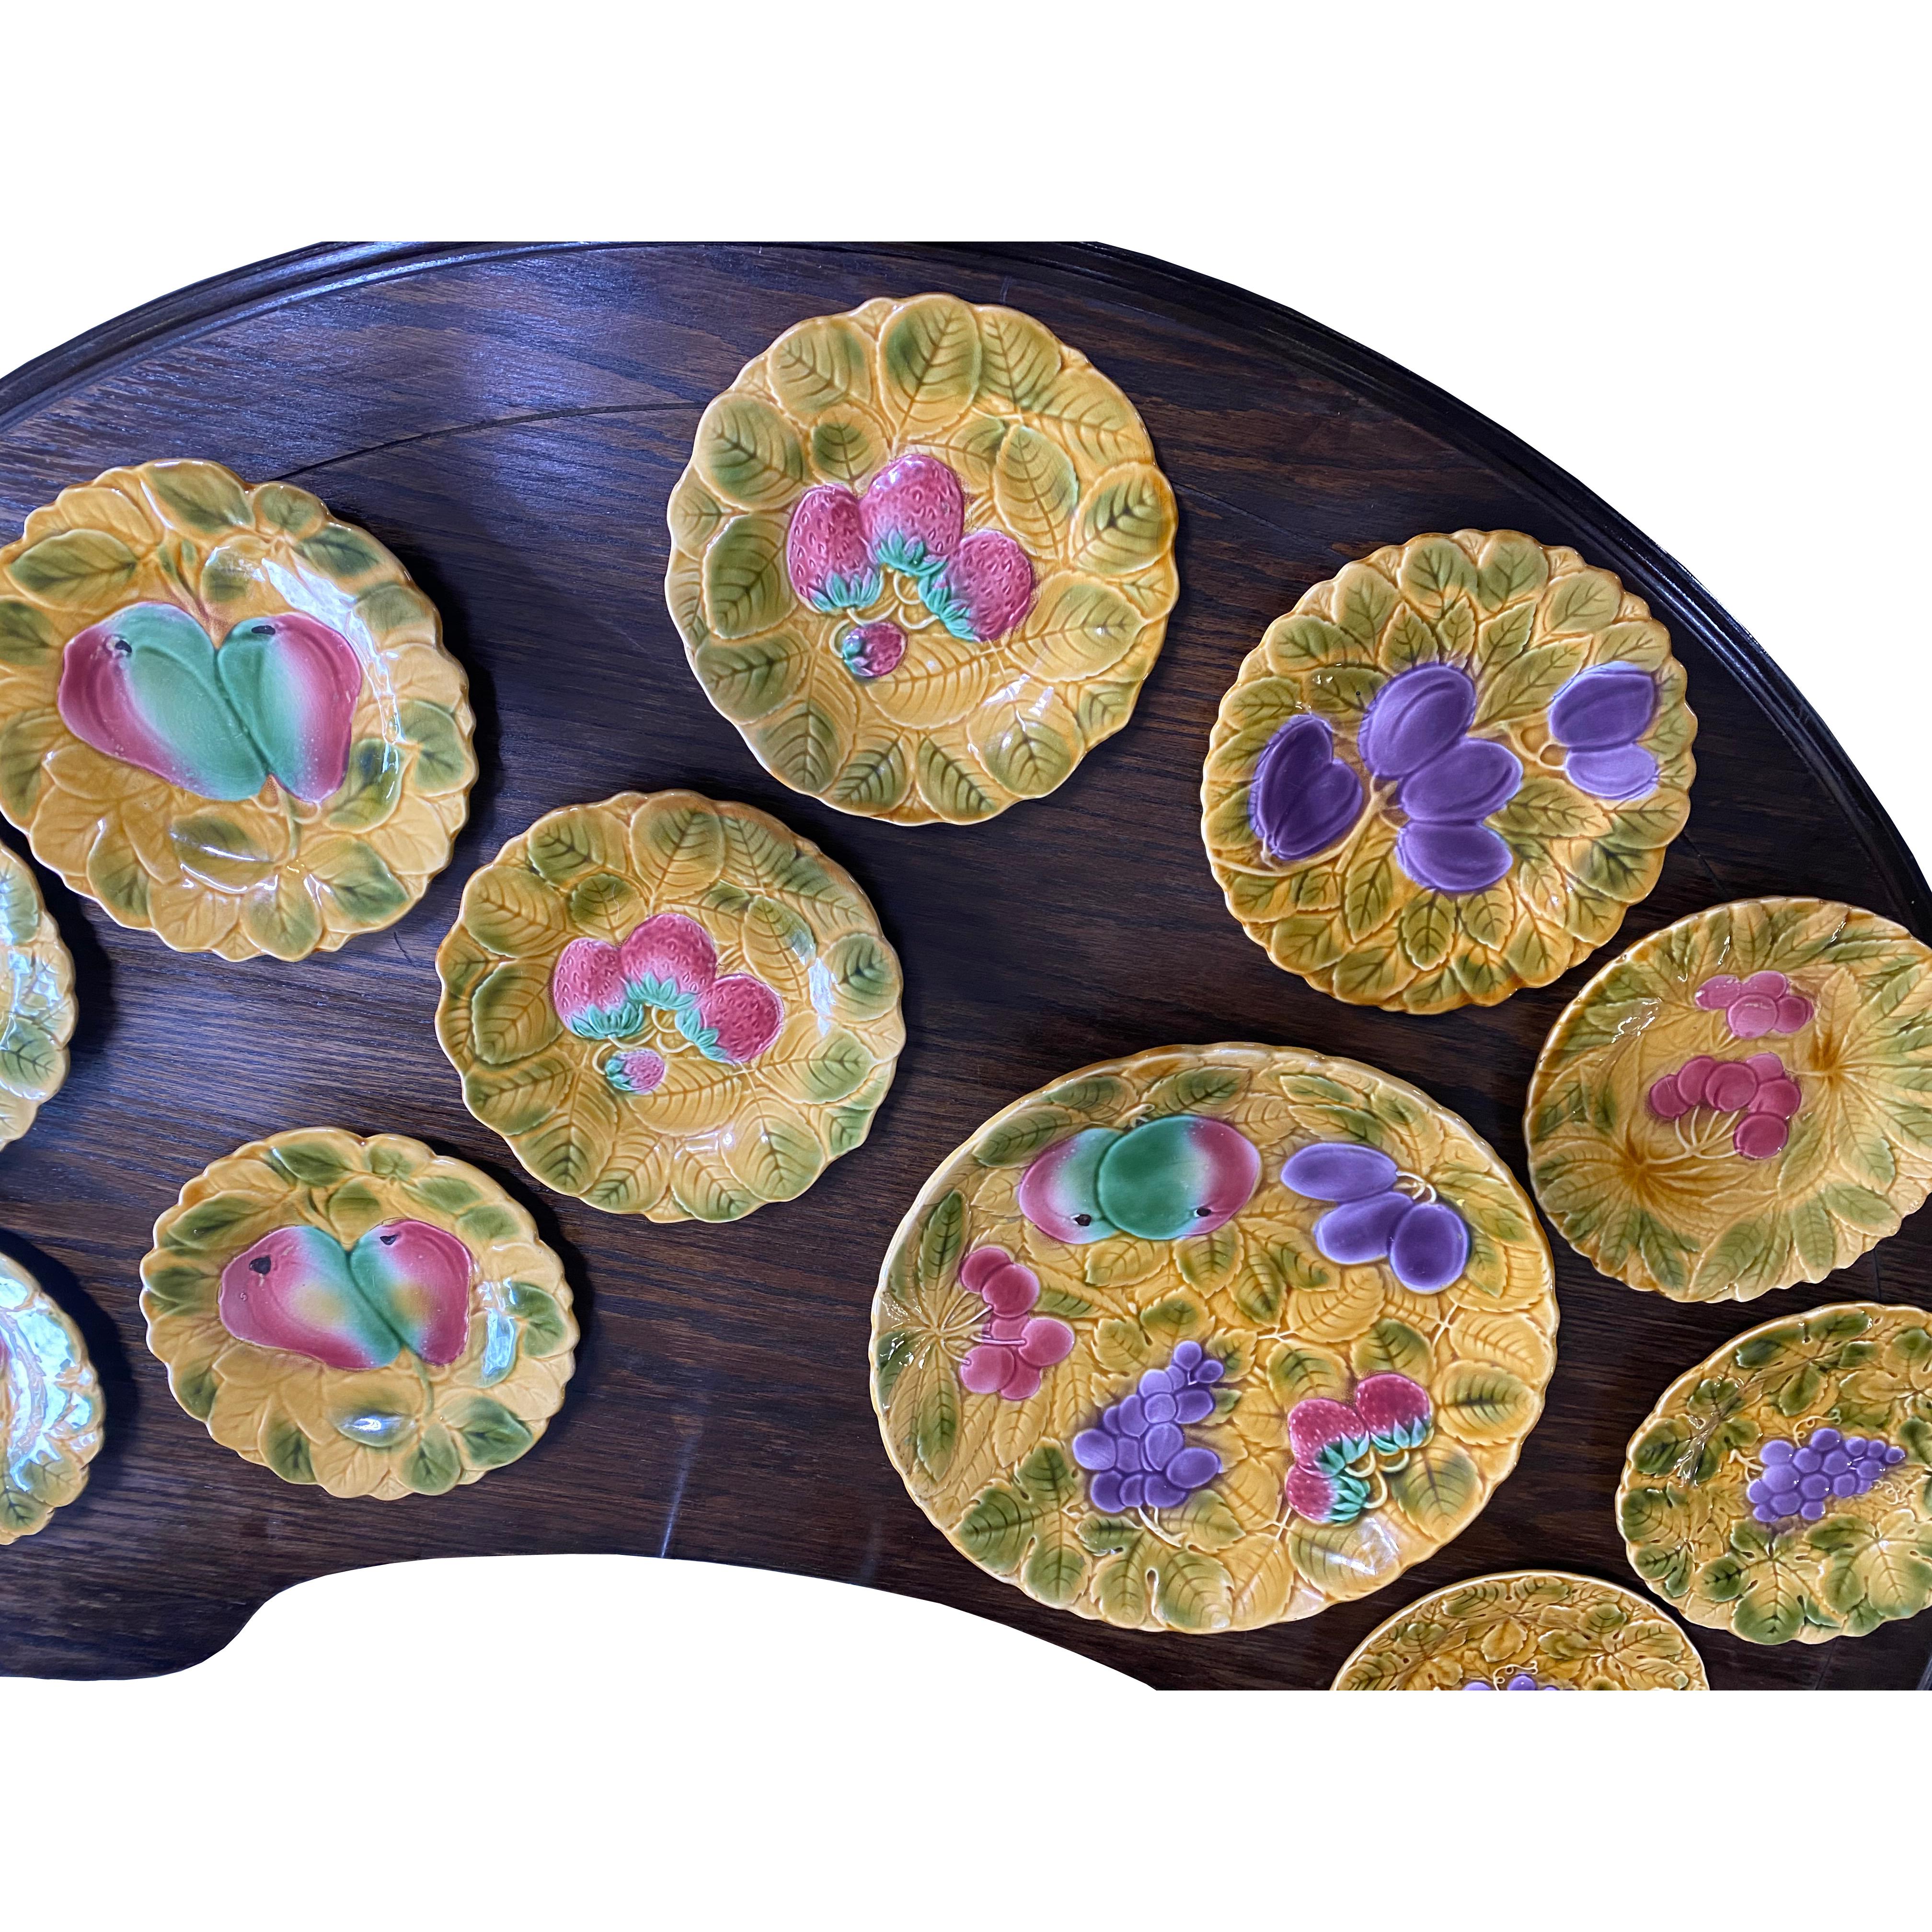 11 Piece Set of Sarreguemines French Faience Majolica Dessert Plates In Good Condition For Sale In Pasadena, TX